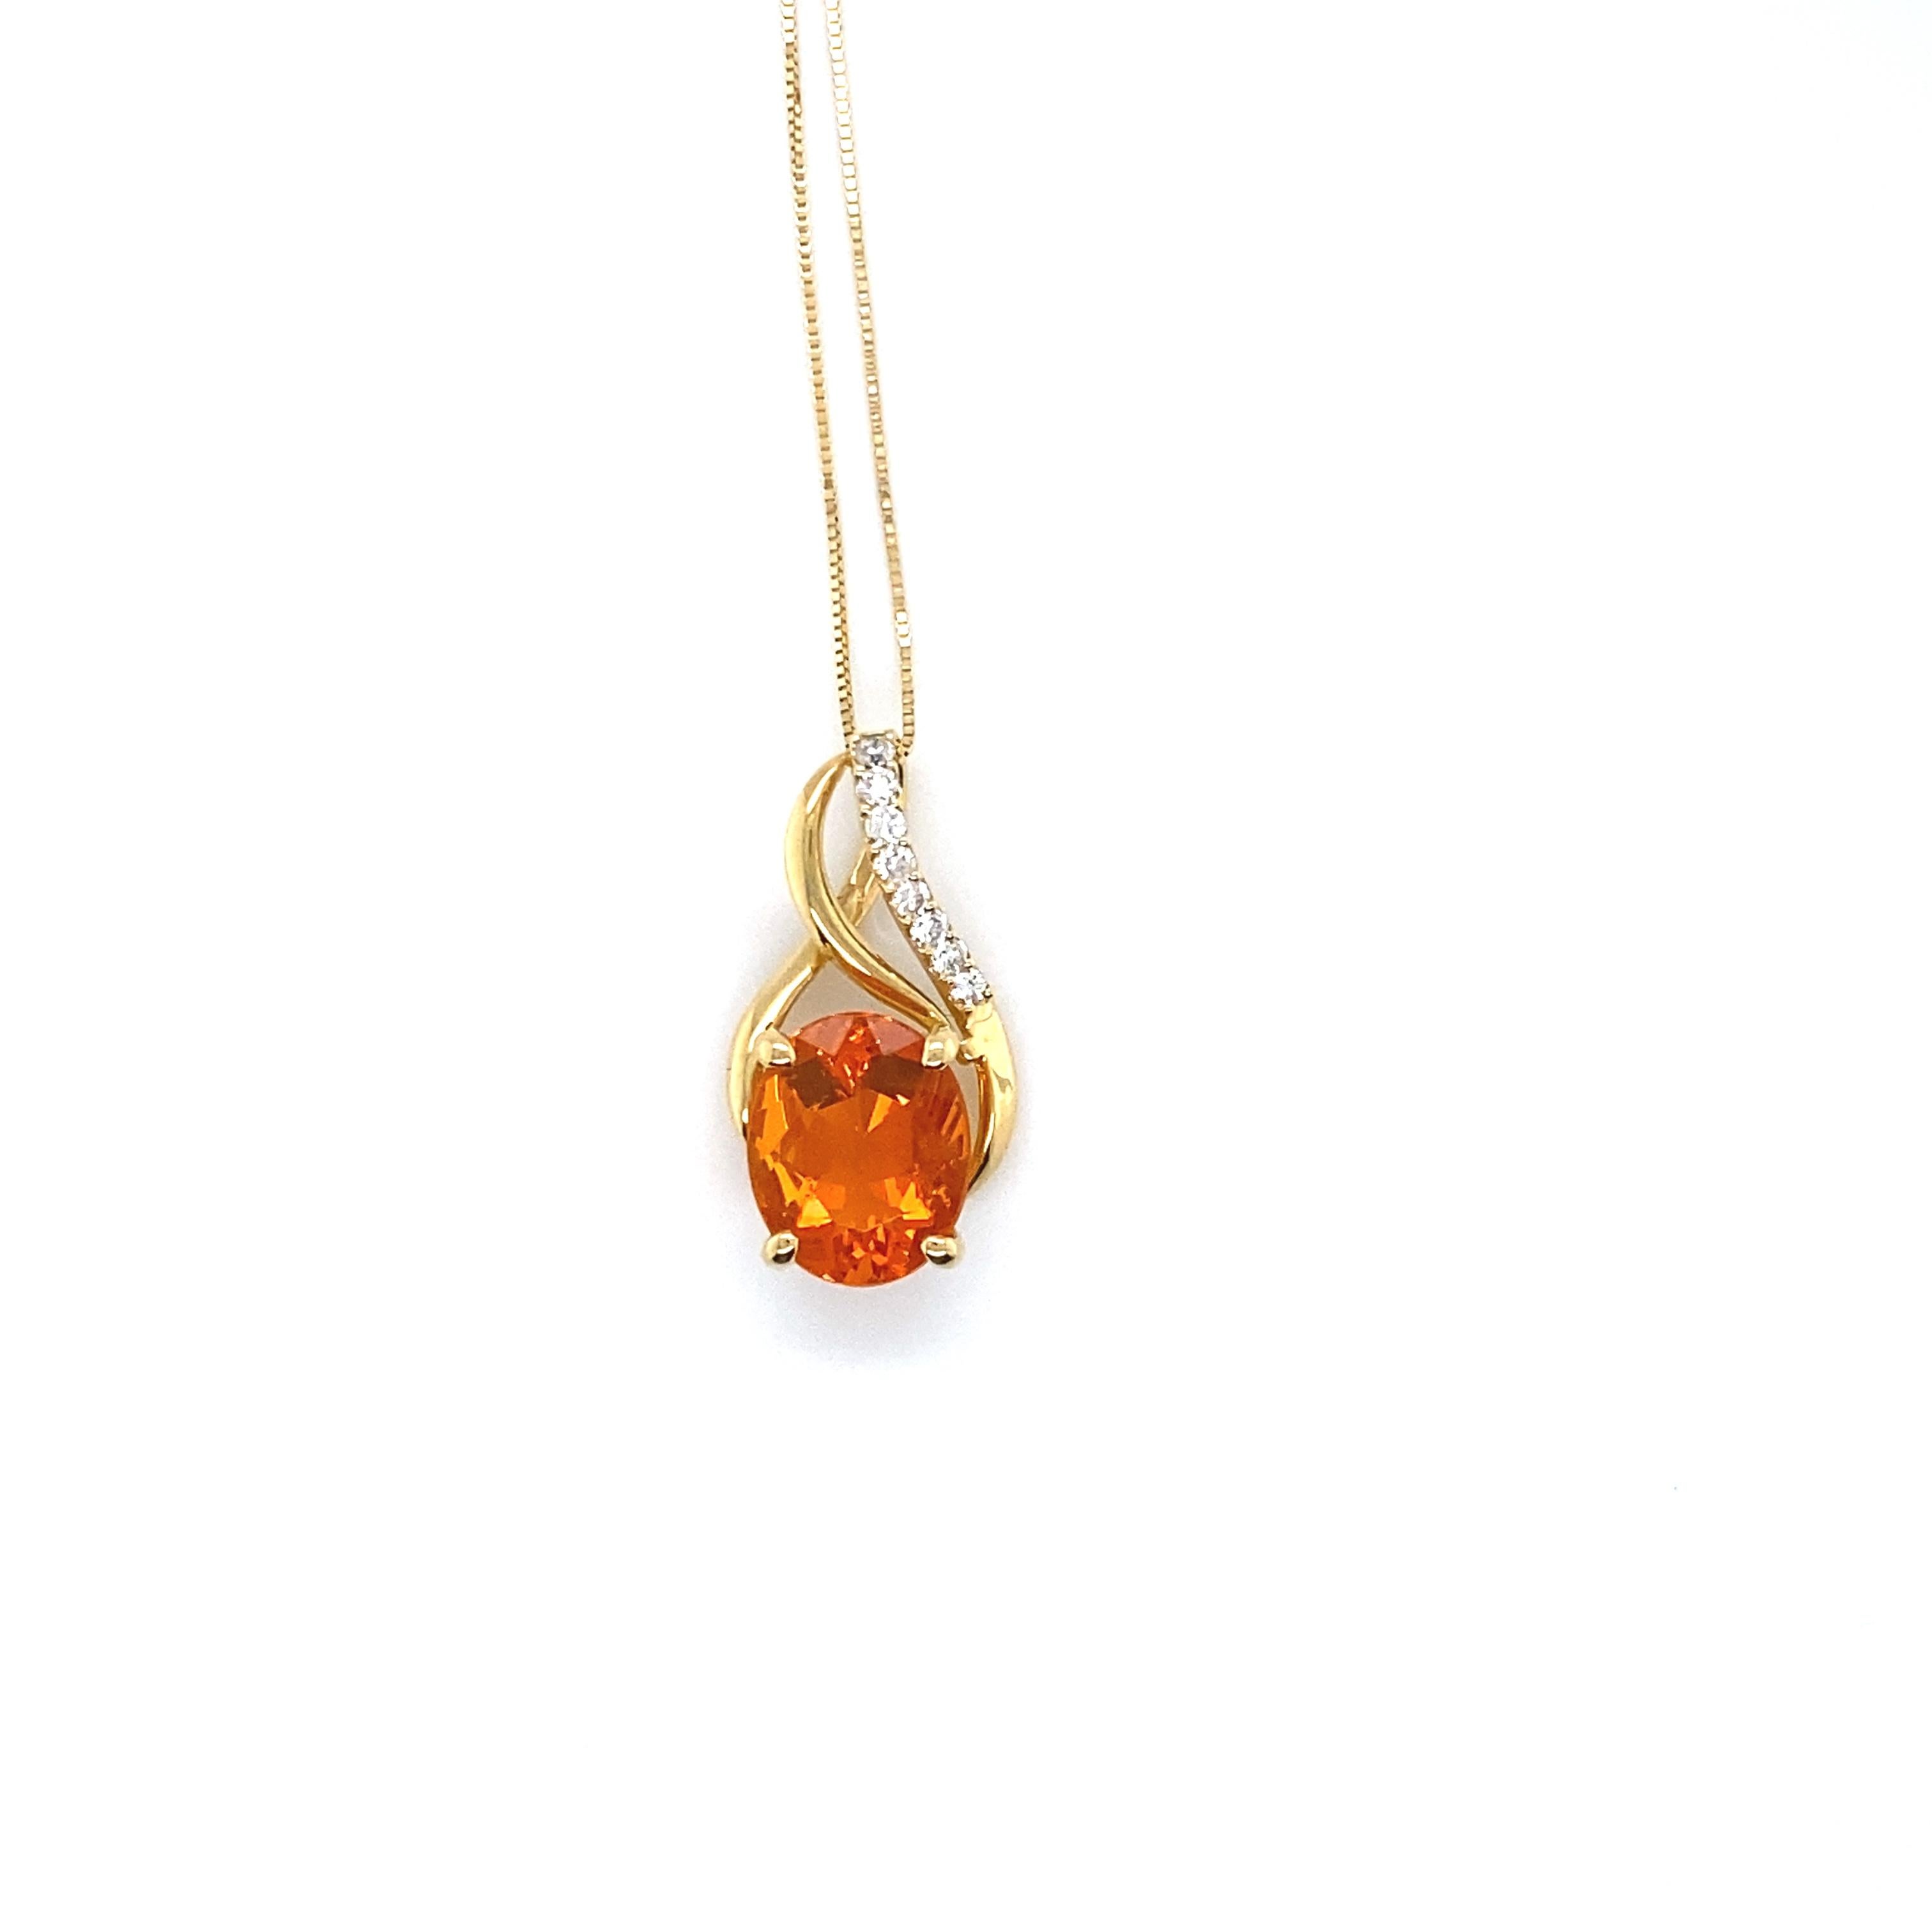 A stunning Pendant Necklace featuring a 2.35 Carat Natural, Faceted Fire Opal and 0.17 Carats of Diamond Accents set in 18K Yellow Gold. Opals are known for exhibiting flashes of rainbow colors known as 